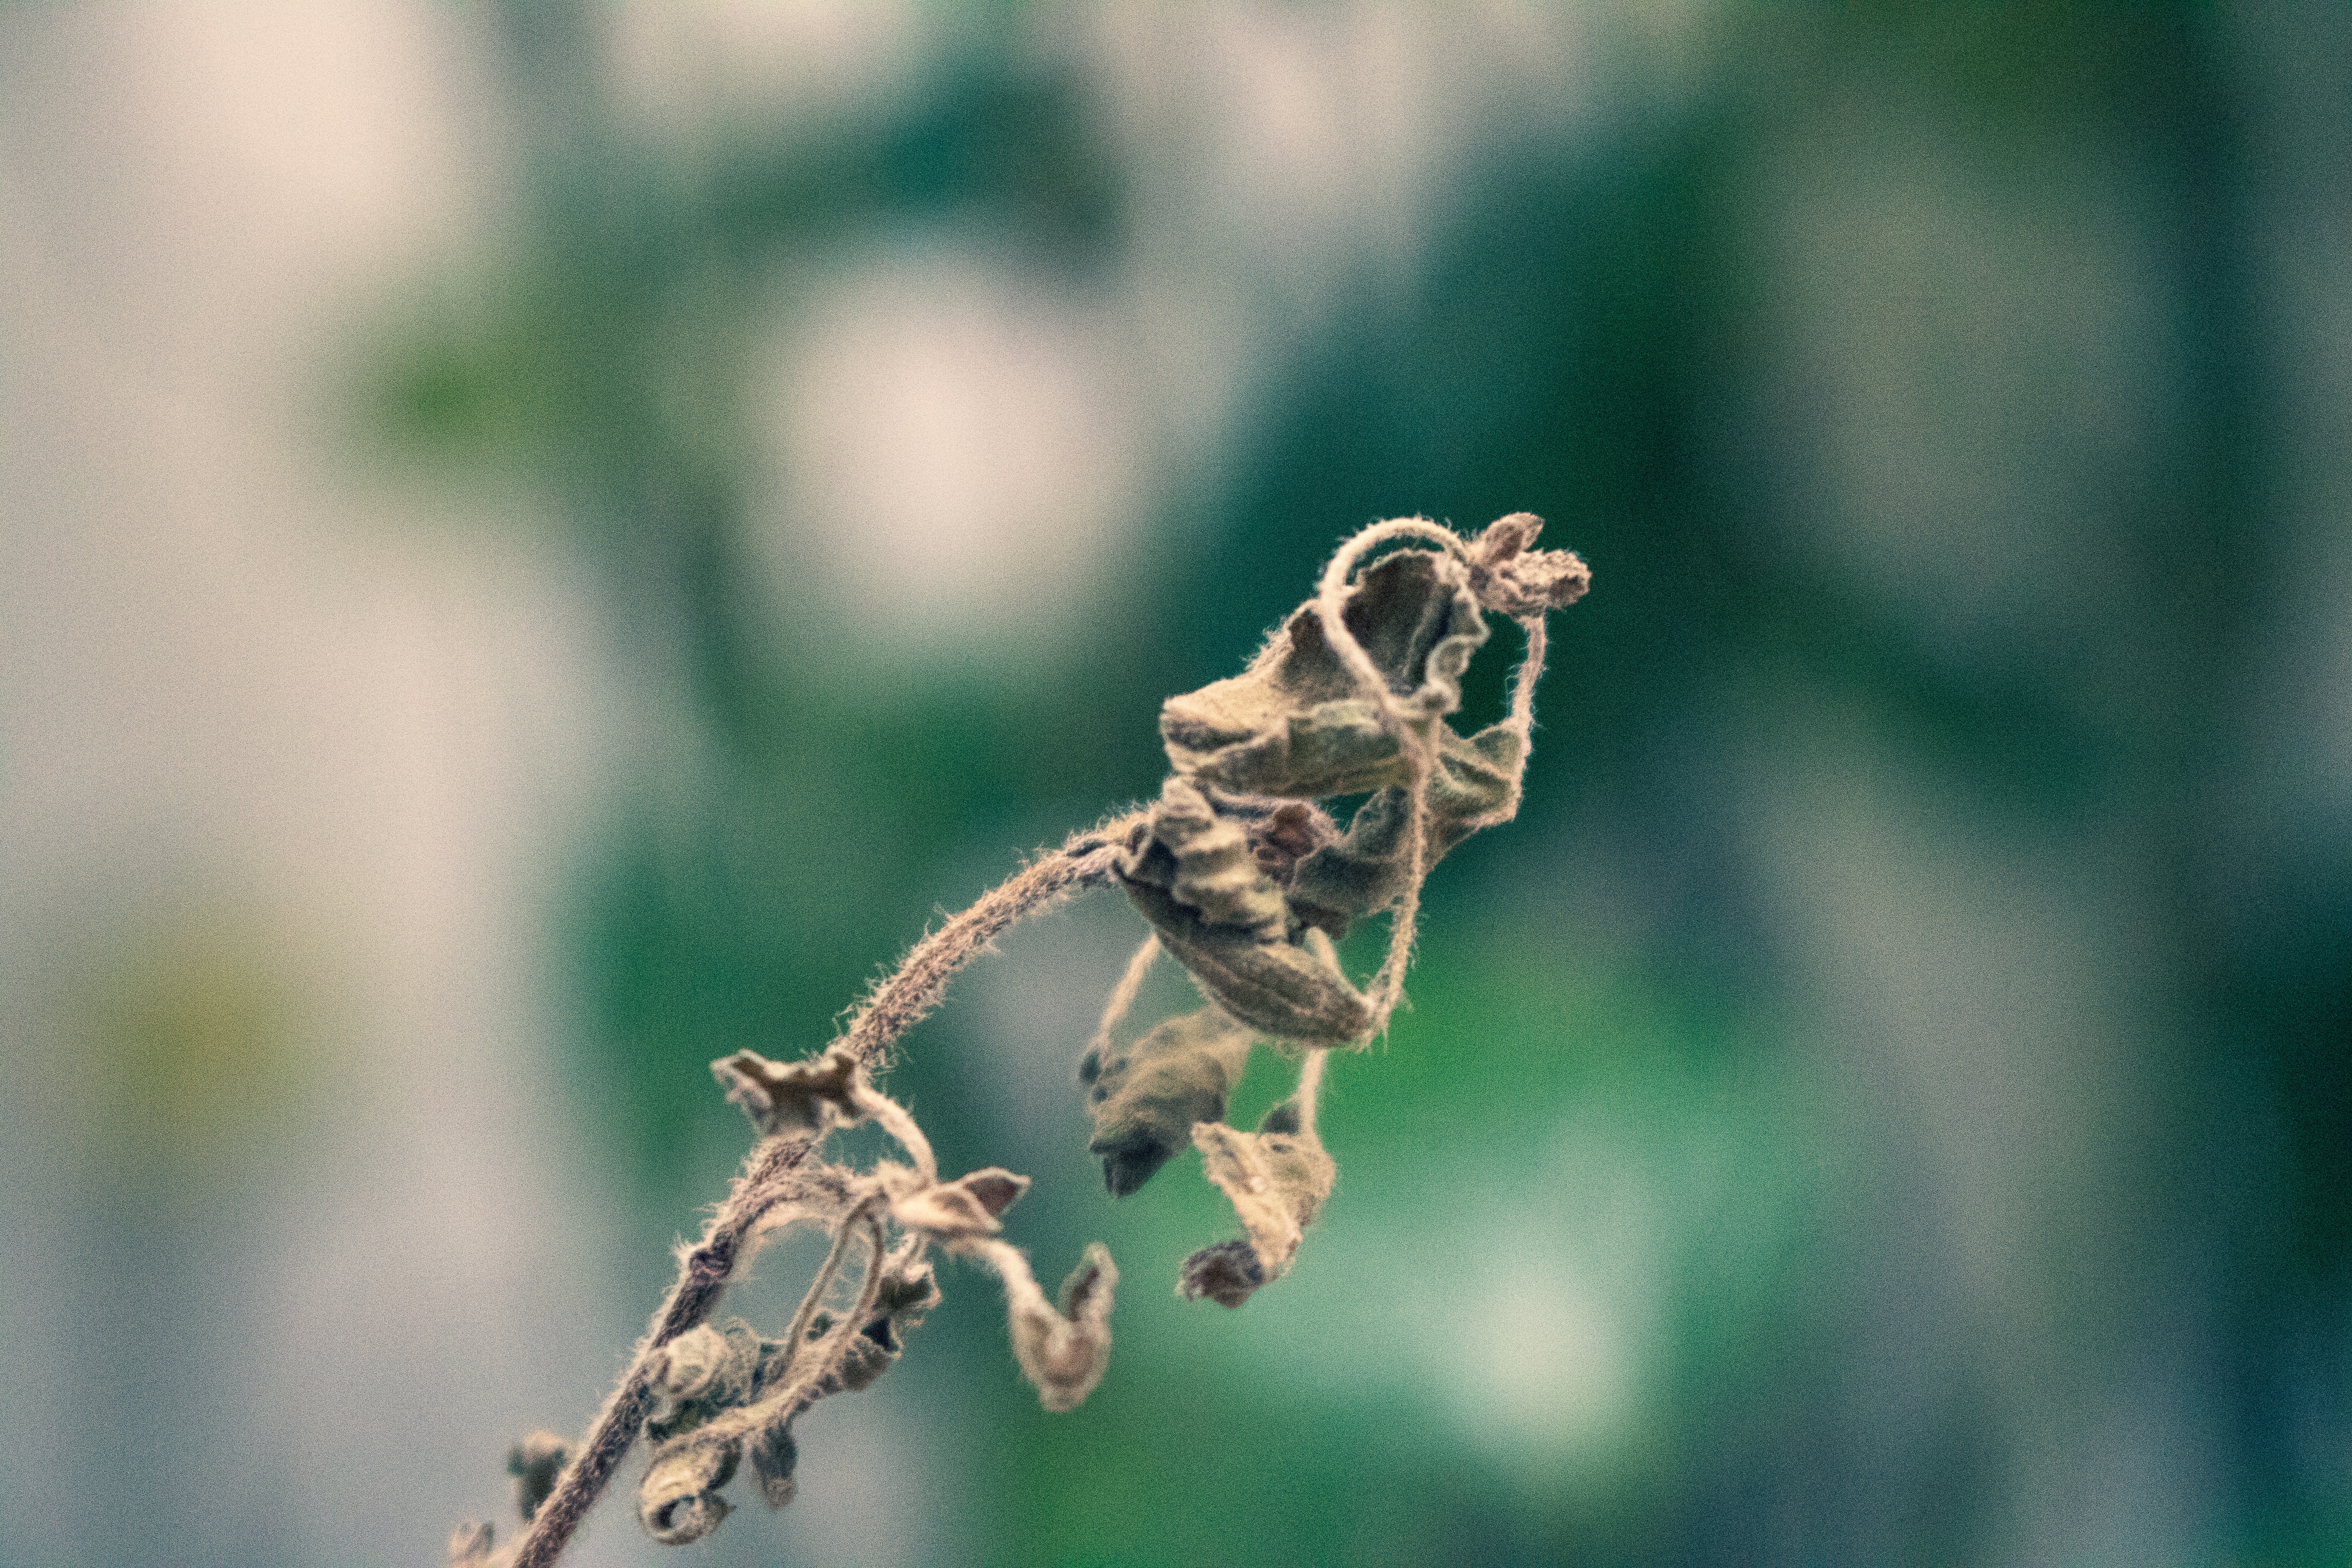 Withered flower photo